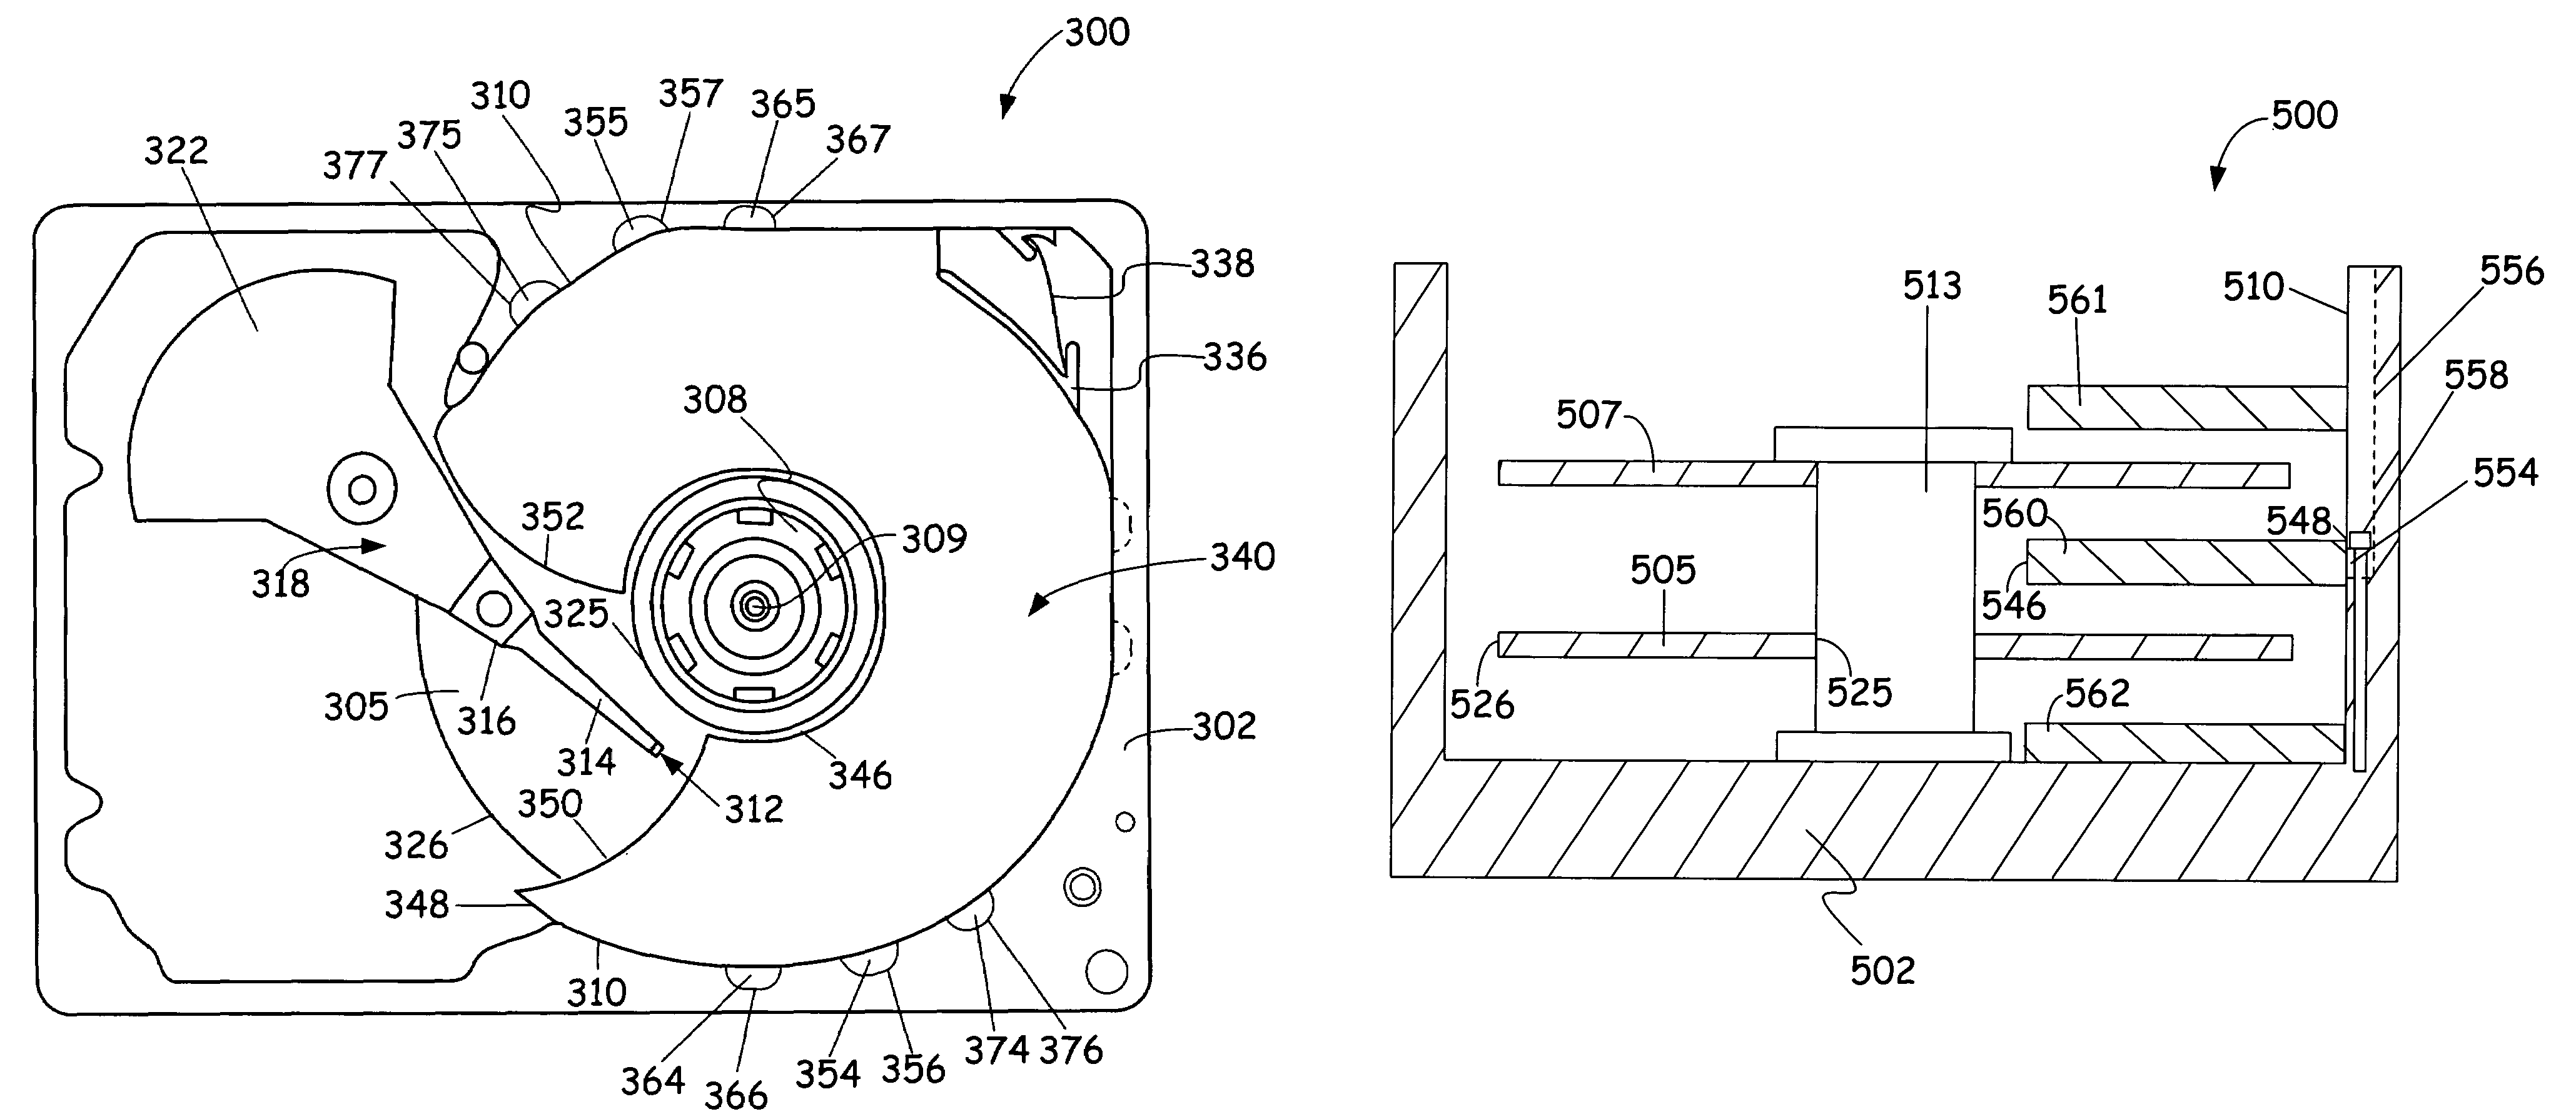 Air stream filtration system adjacent a rotational element of a data storage device